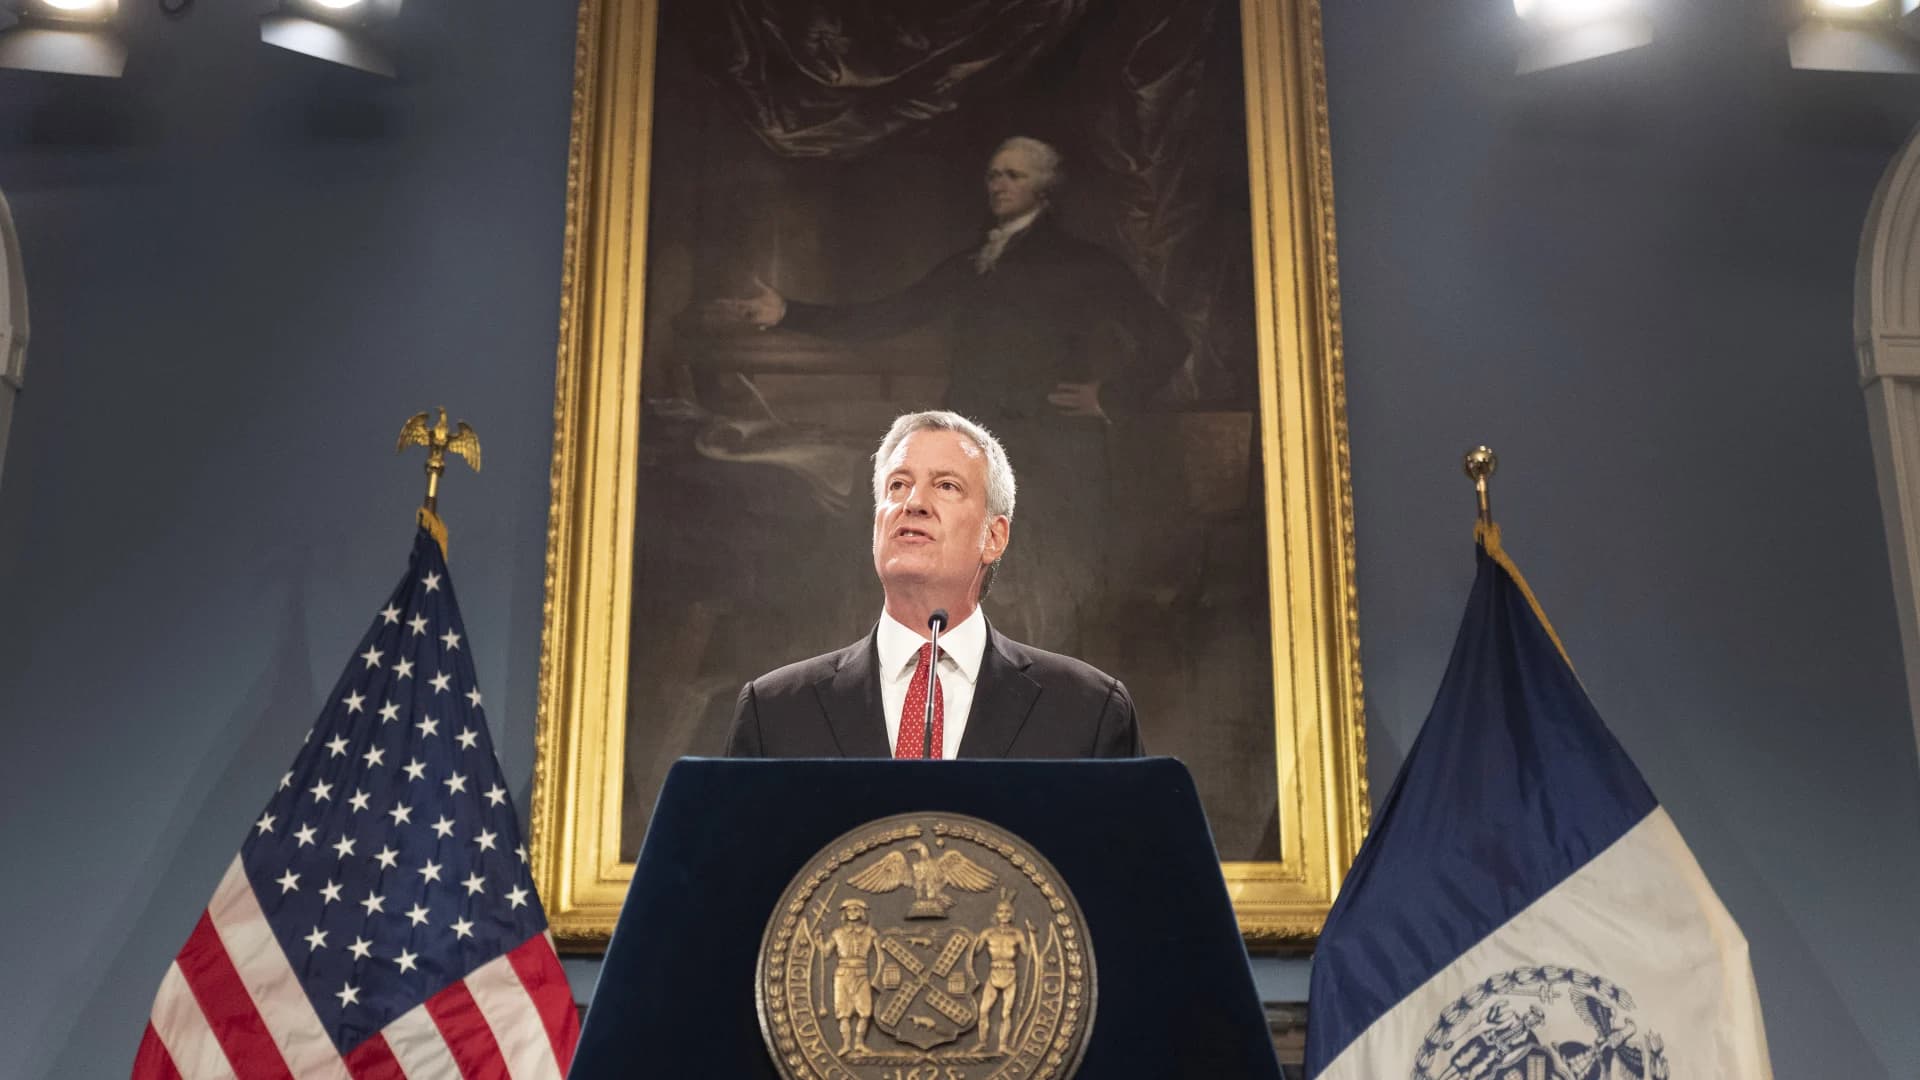 WATCH: Mayor Bill de Blasio delivers State of the City address